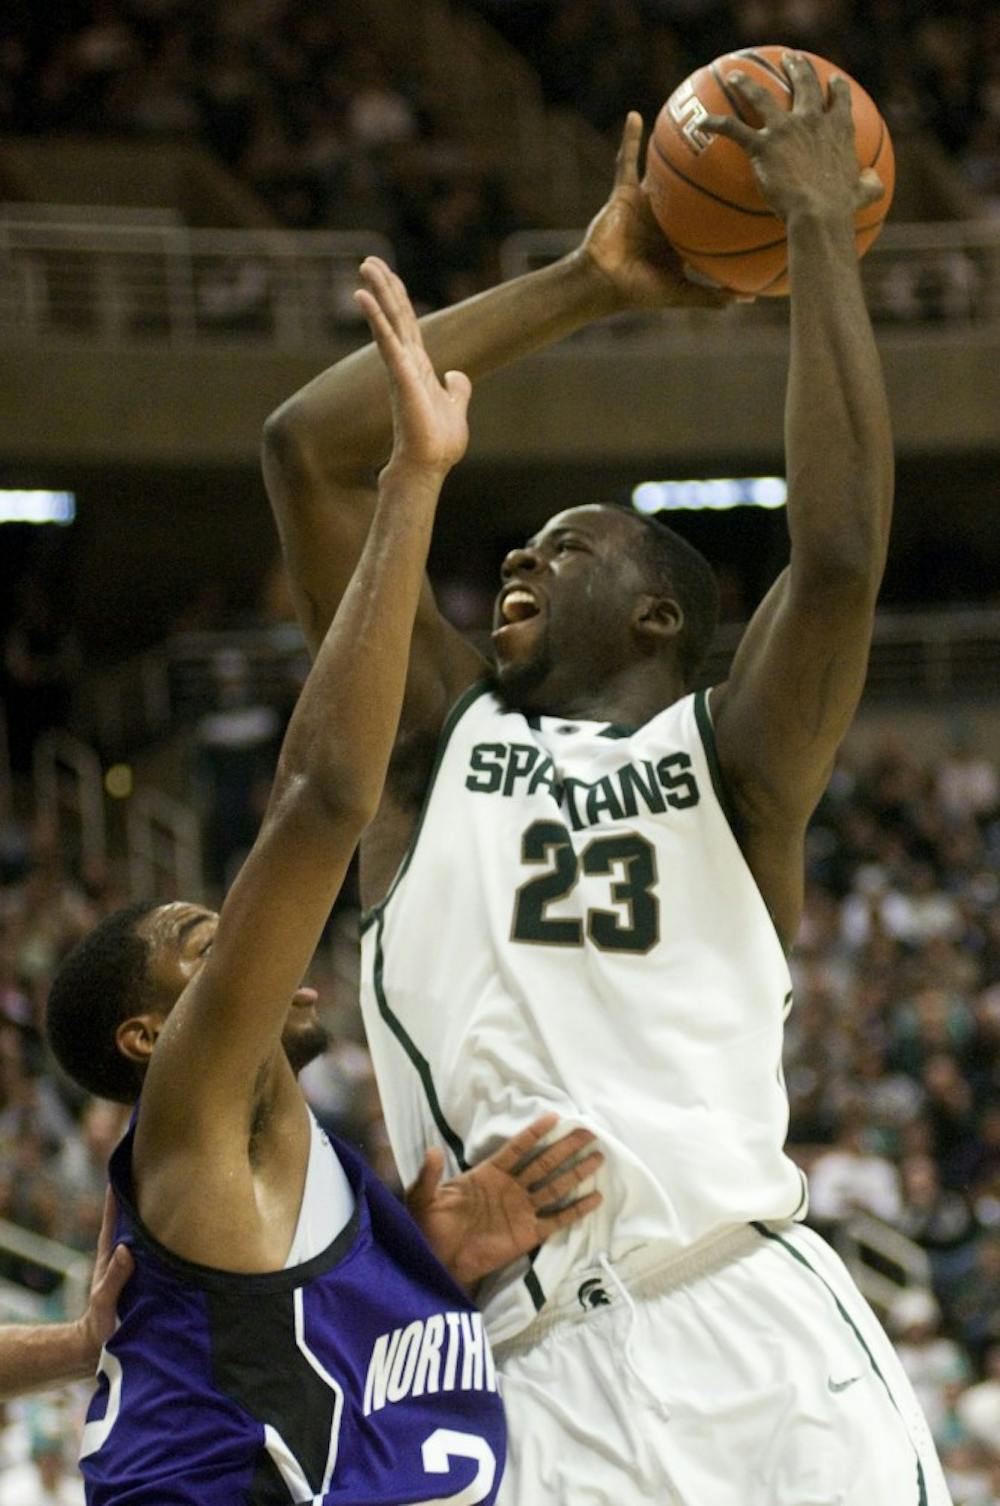 Junior forward Draymond Green goes up for a shot against Northwestern guard Michael Thompson in the second half of Saturday's game at Breslin Center. Green scored 16 total points, lifting the Spartans to a 71-67 win over the Wildcats in overtime. Lauren Wood/The State News